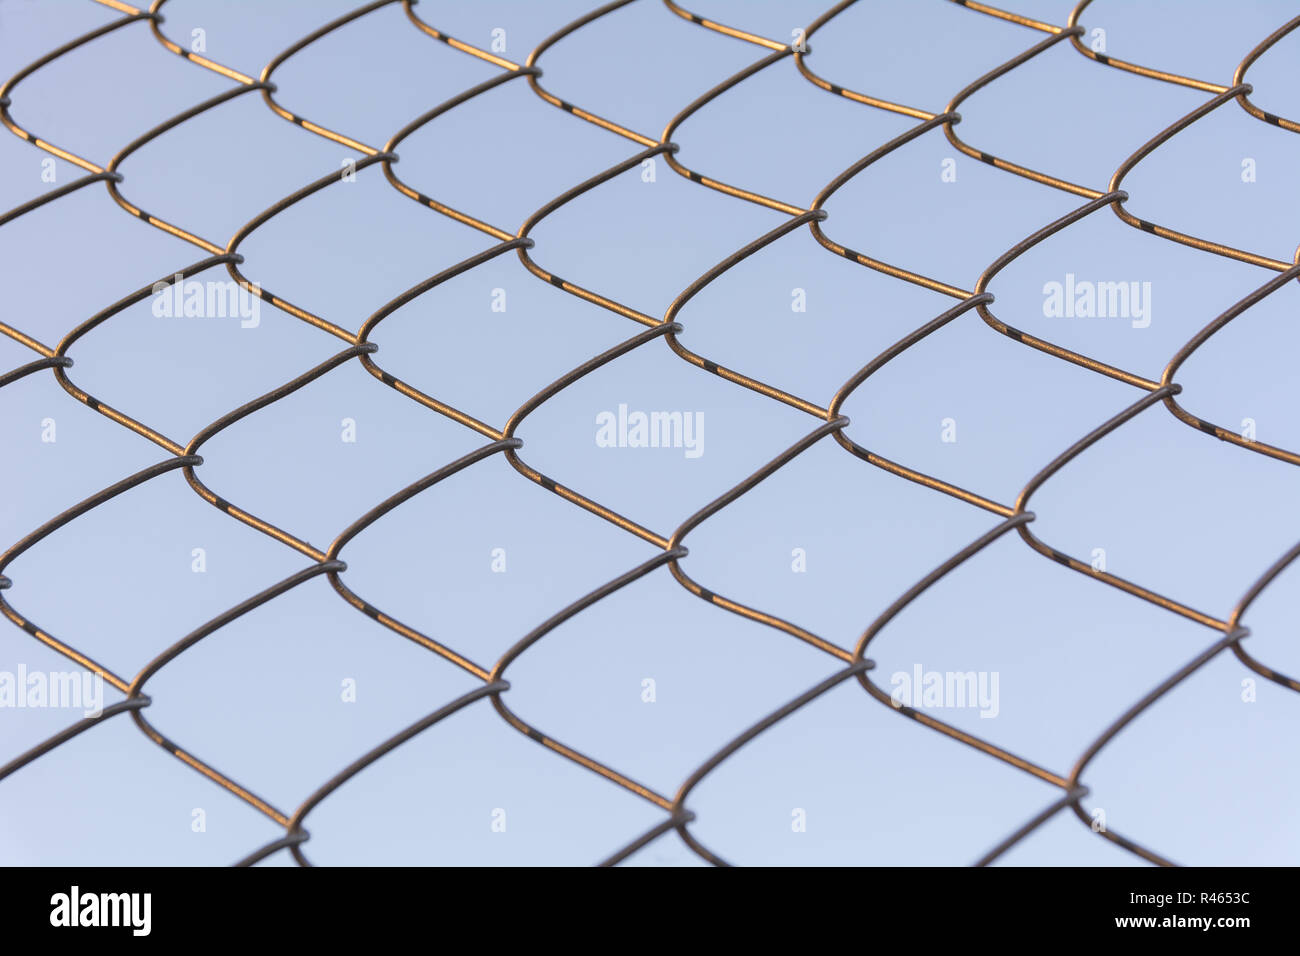 Old and rusty iron net wrapped on blue sky background. Stock Photo